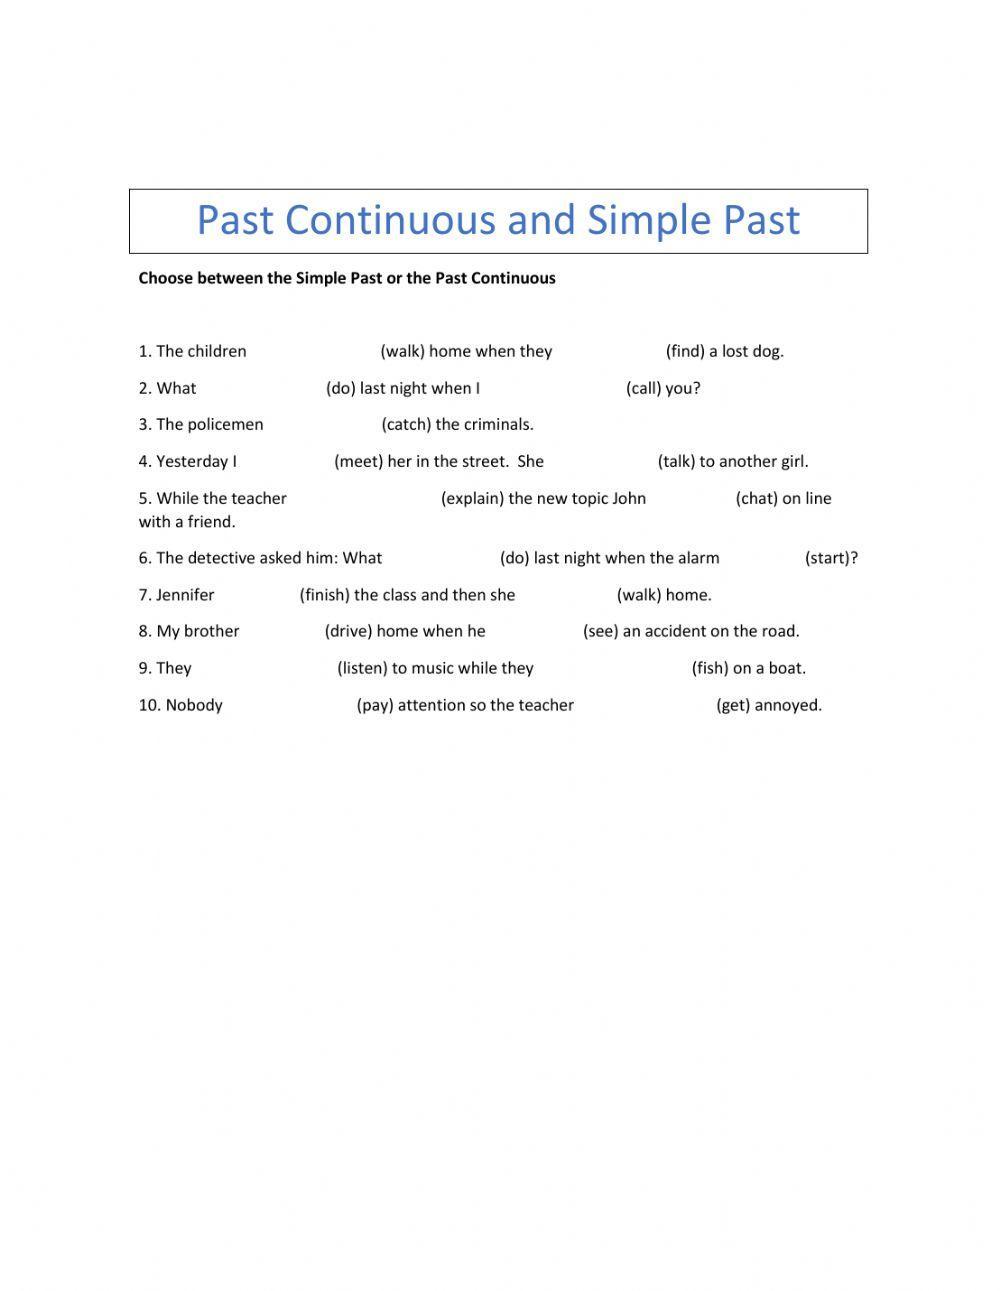 Past Continuous and Past Simple